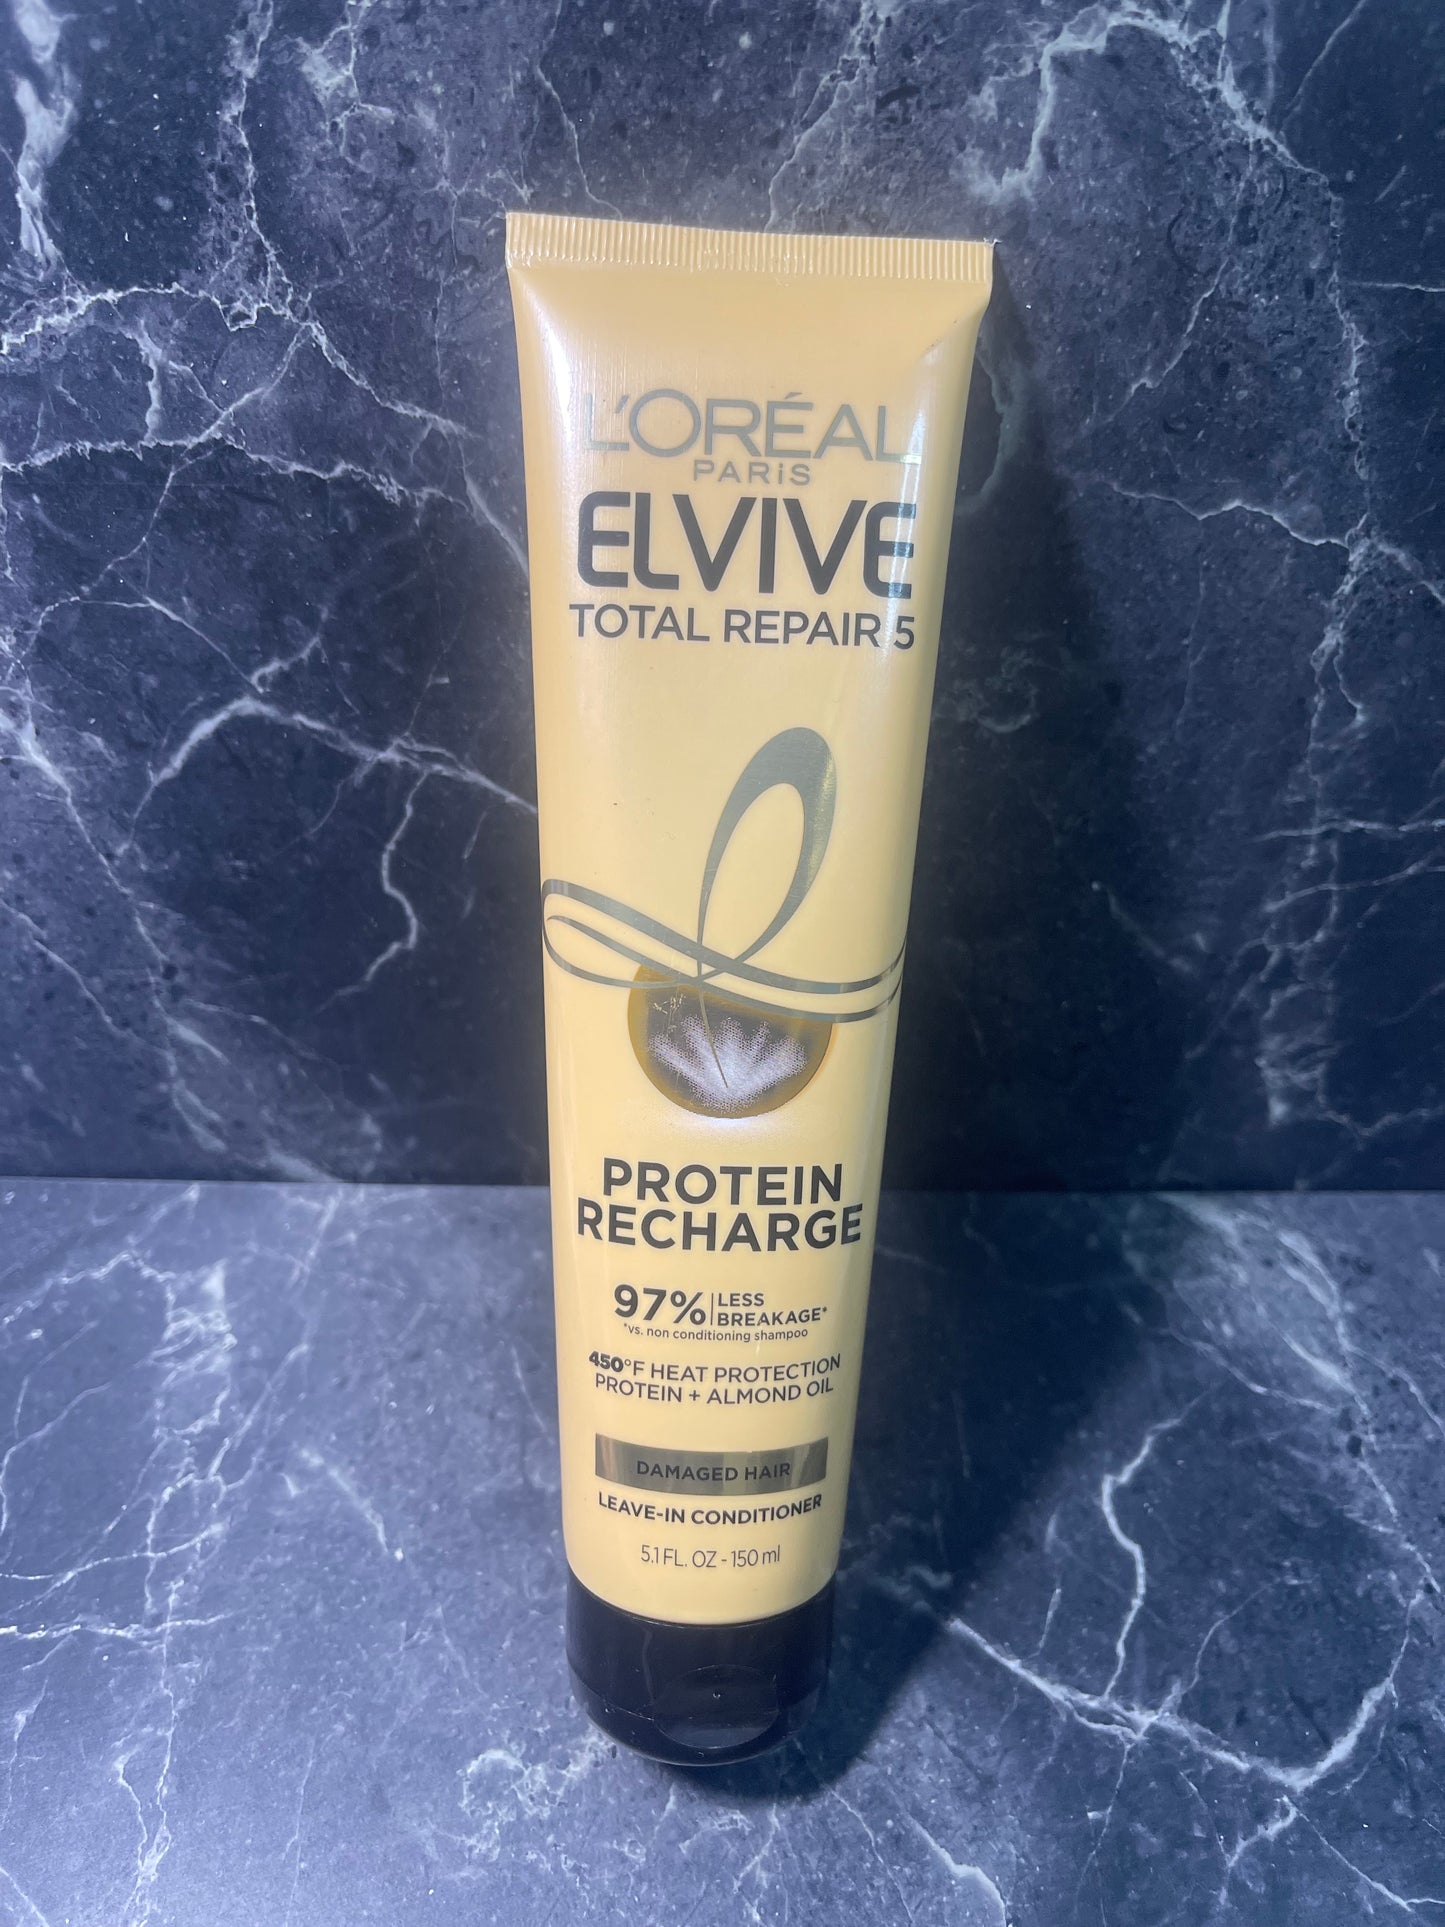 L'Oreal Elvive Total Repair 5 Protein Recharge Hair Leave In Conditioner